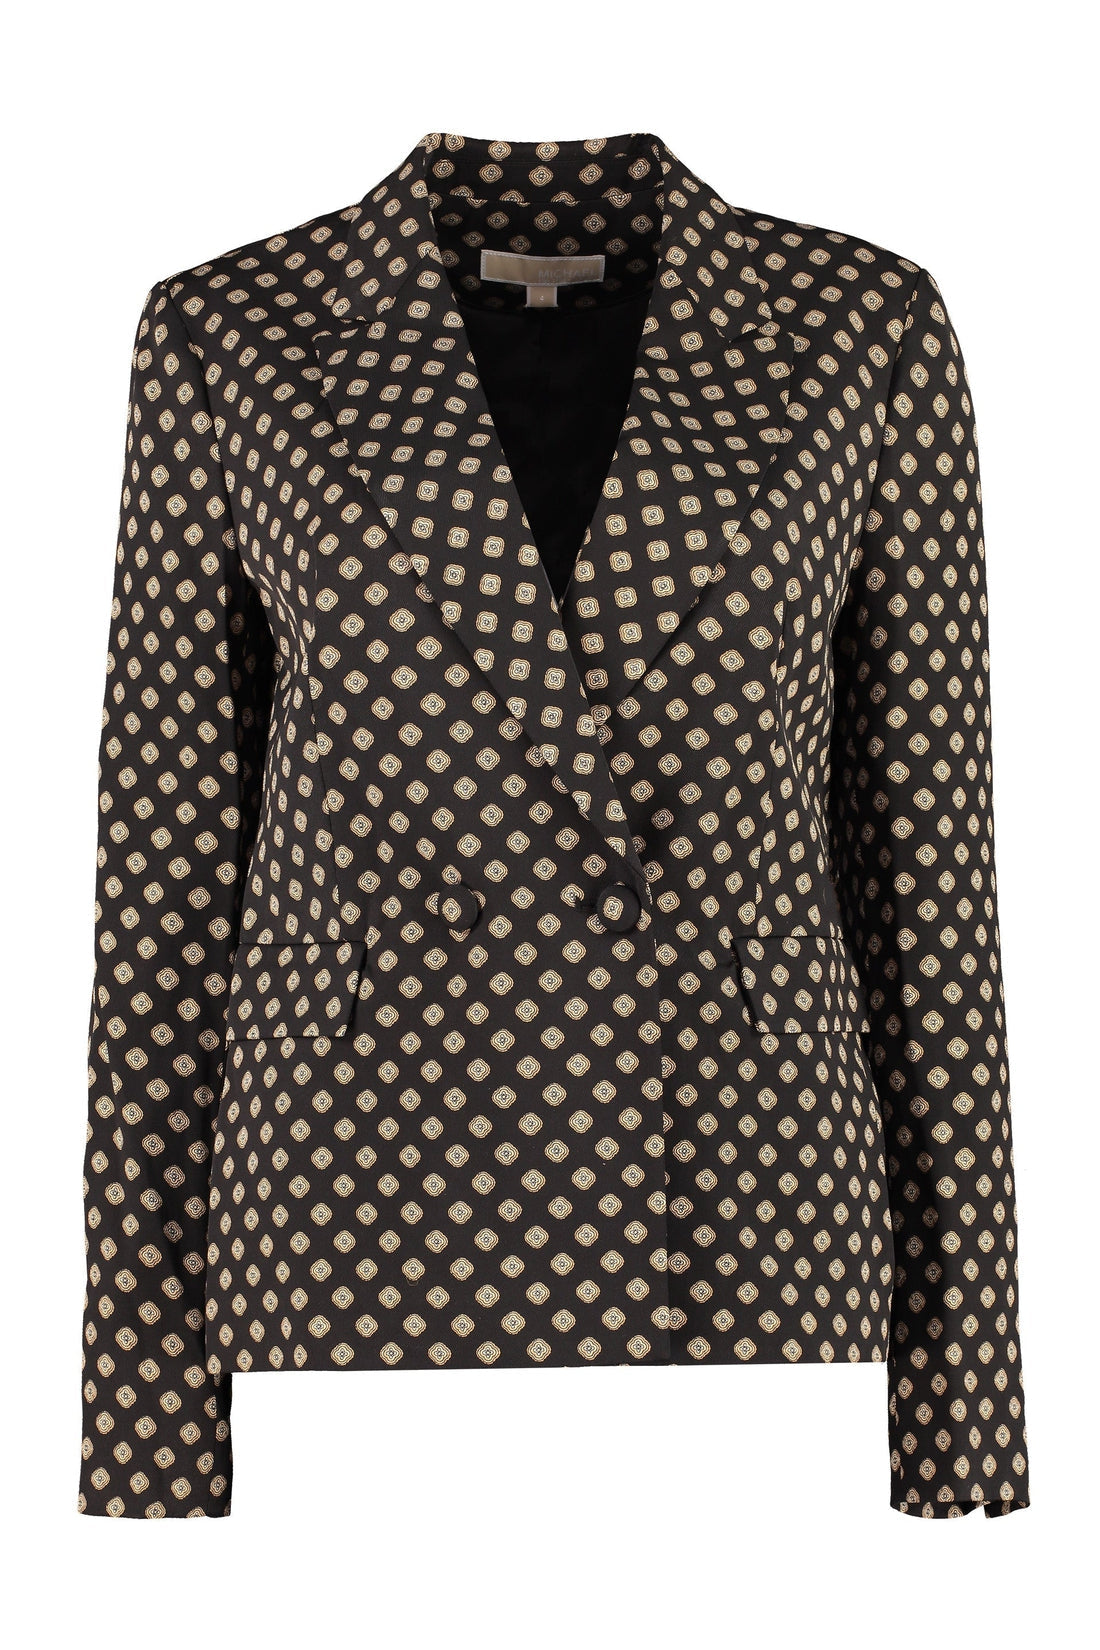 MICHAEL MICHAEL KORS-OUTLET-SALE-Printed double breasted blazer-ARCHIVIST